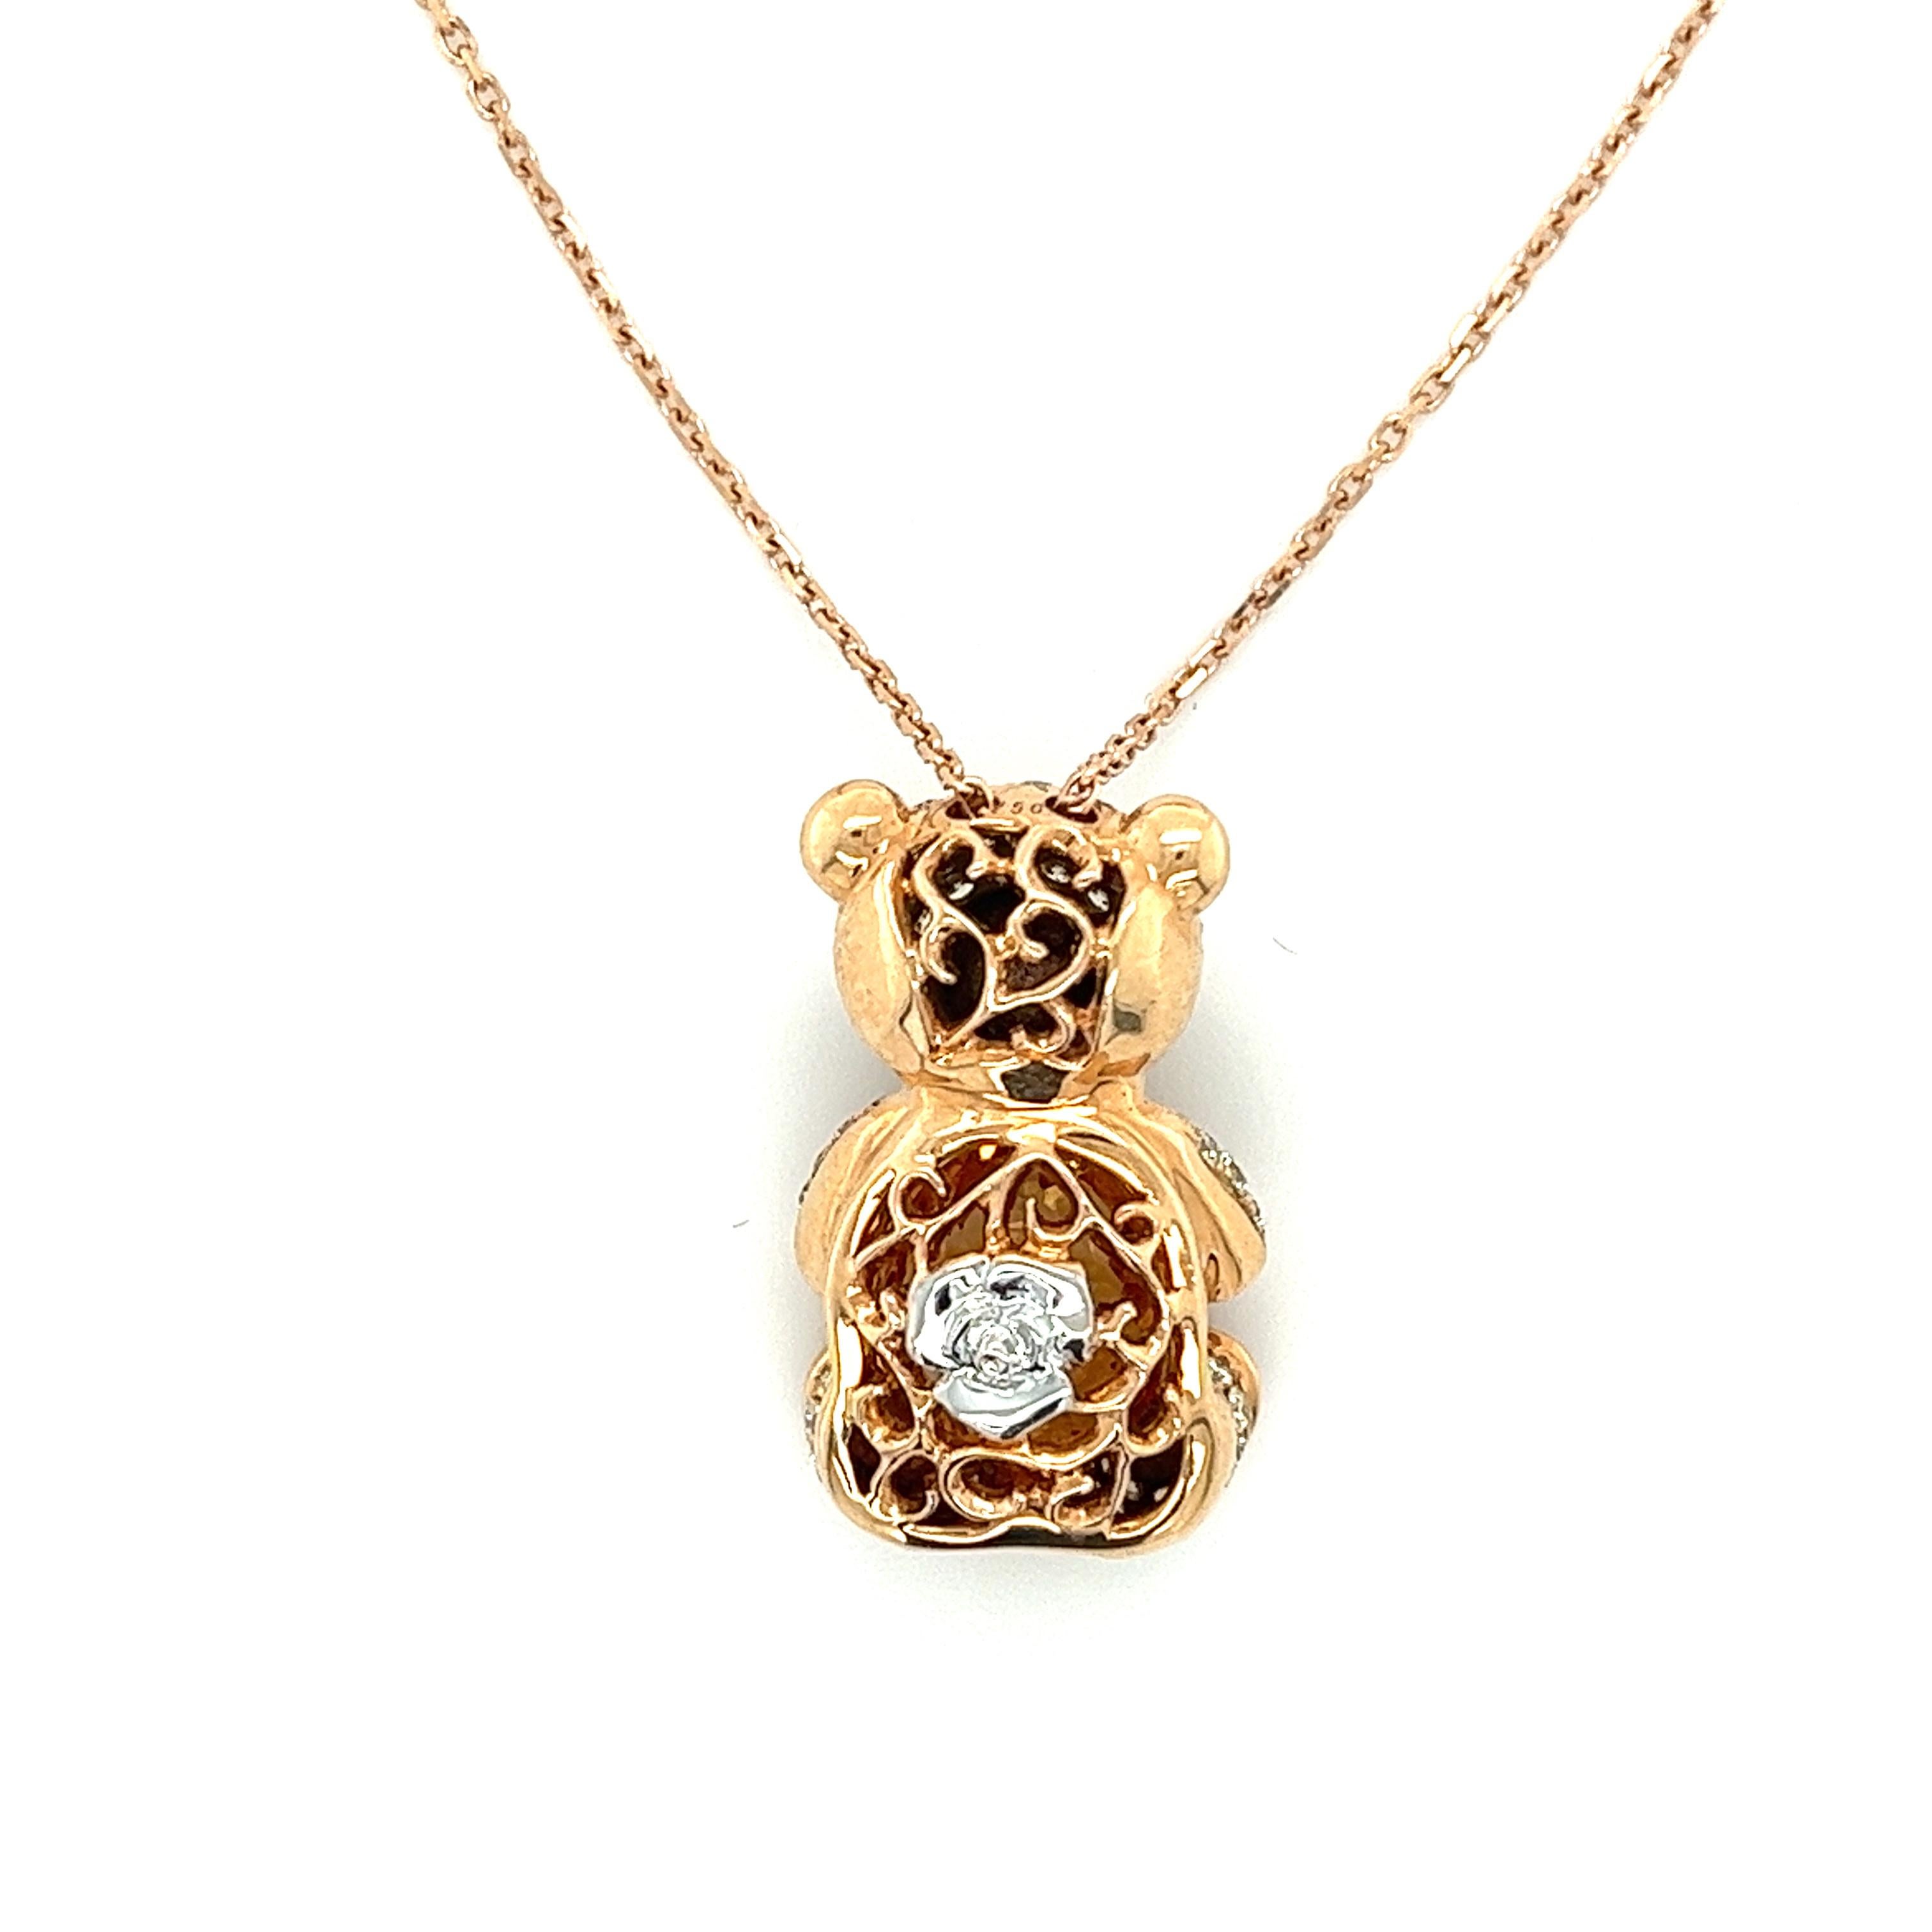 18K Rose Gold Citrine Bear Pendant Necklace

1 Citrine 3.05 CT
96 Fancy Diamonds 1.13 CT
2 Rubies 0.04 CT
18 K Rose Gold 9.46 GM

A glug of gorgeous sunshine, an attractor of luck, and a stone of pure intention and play, Citrine lightens the load